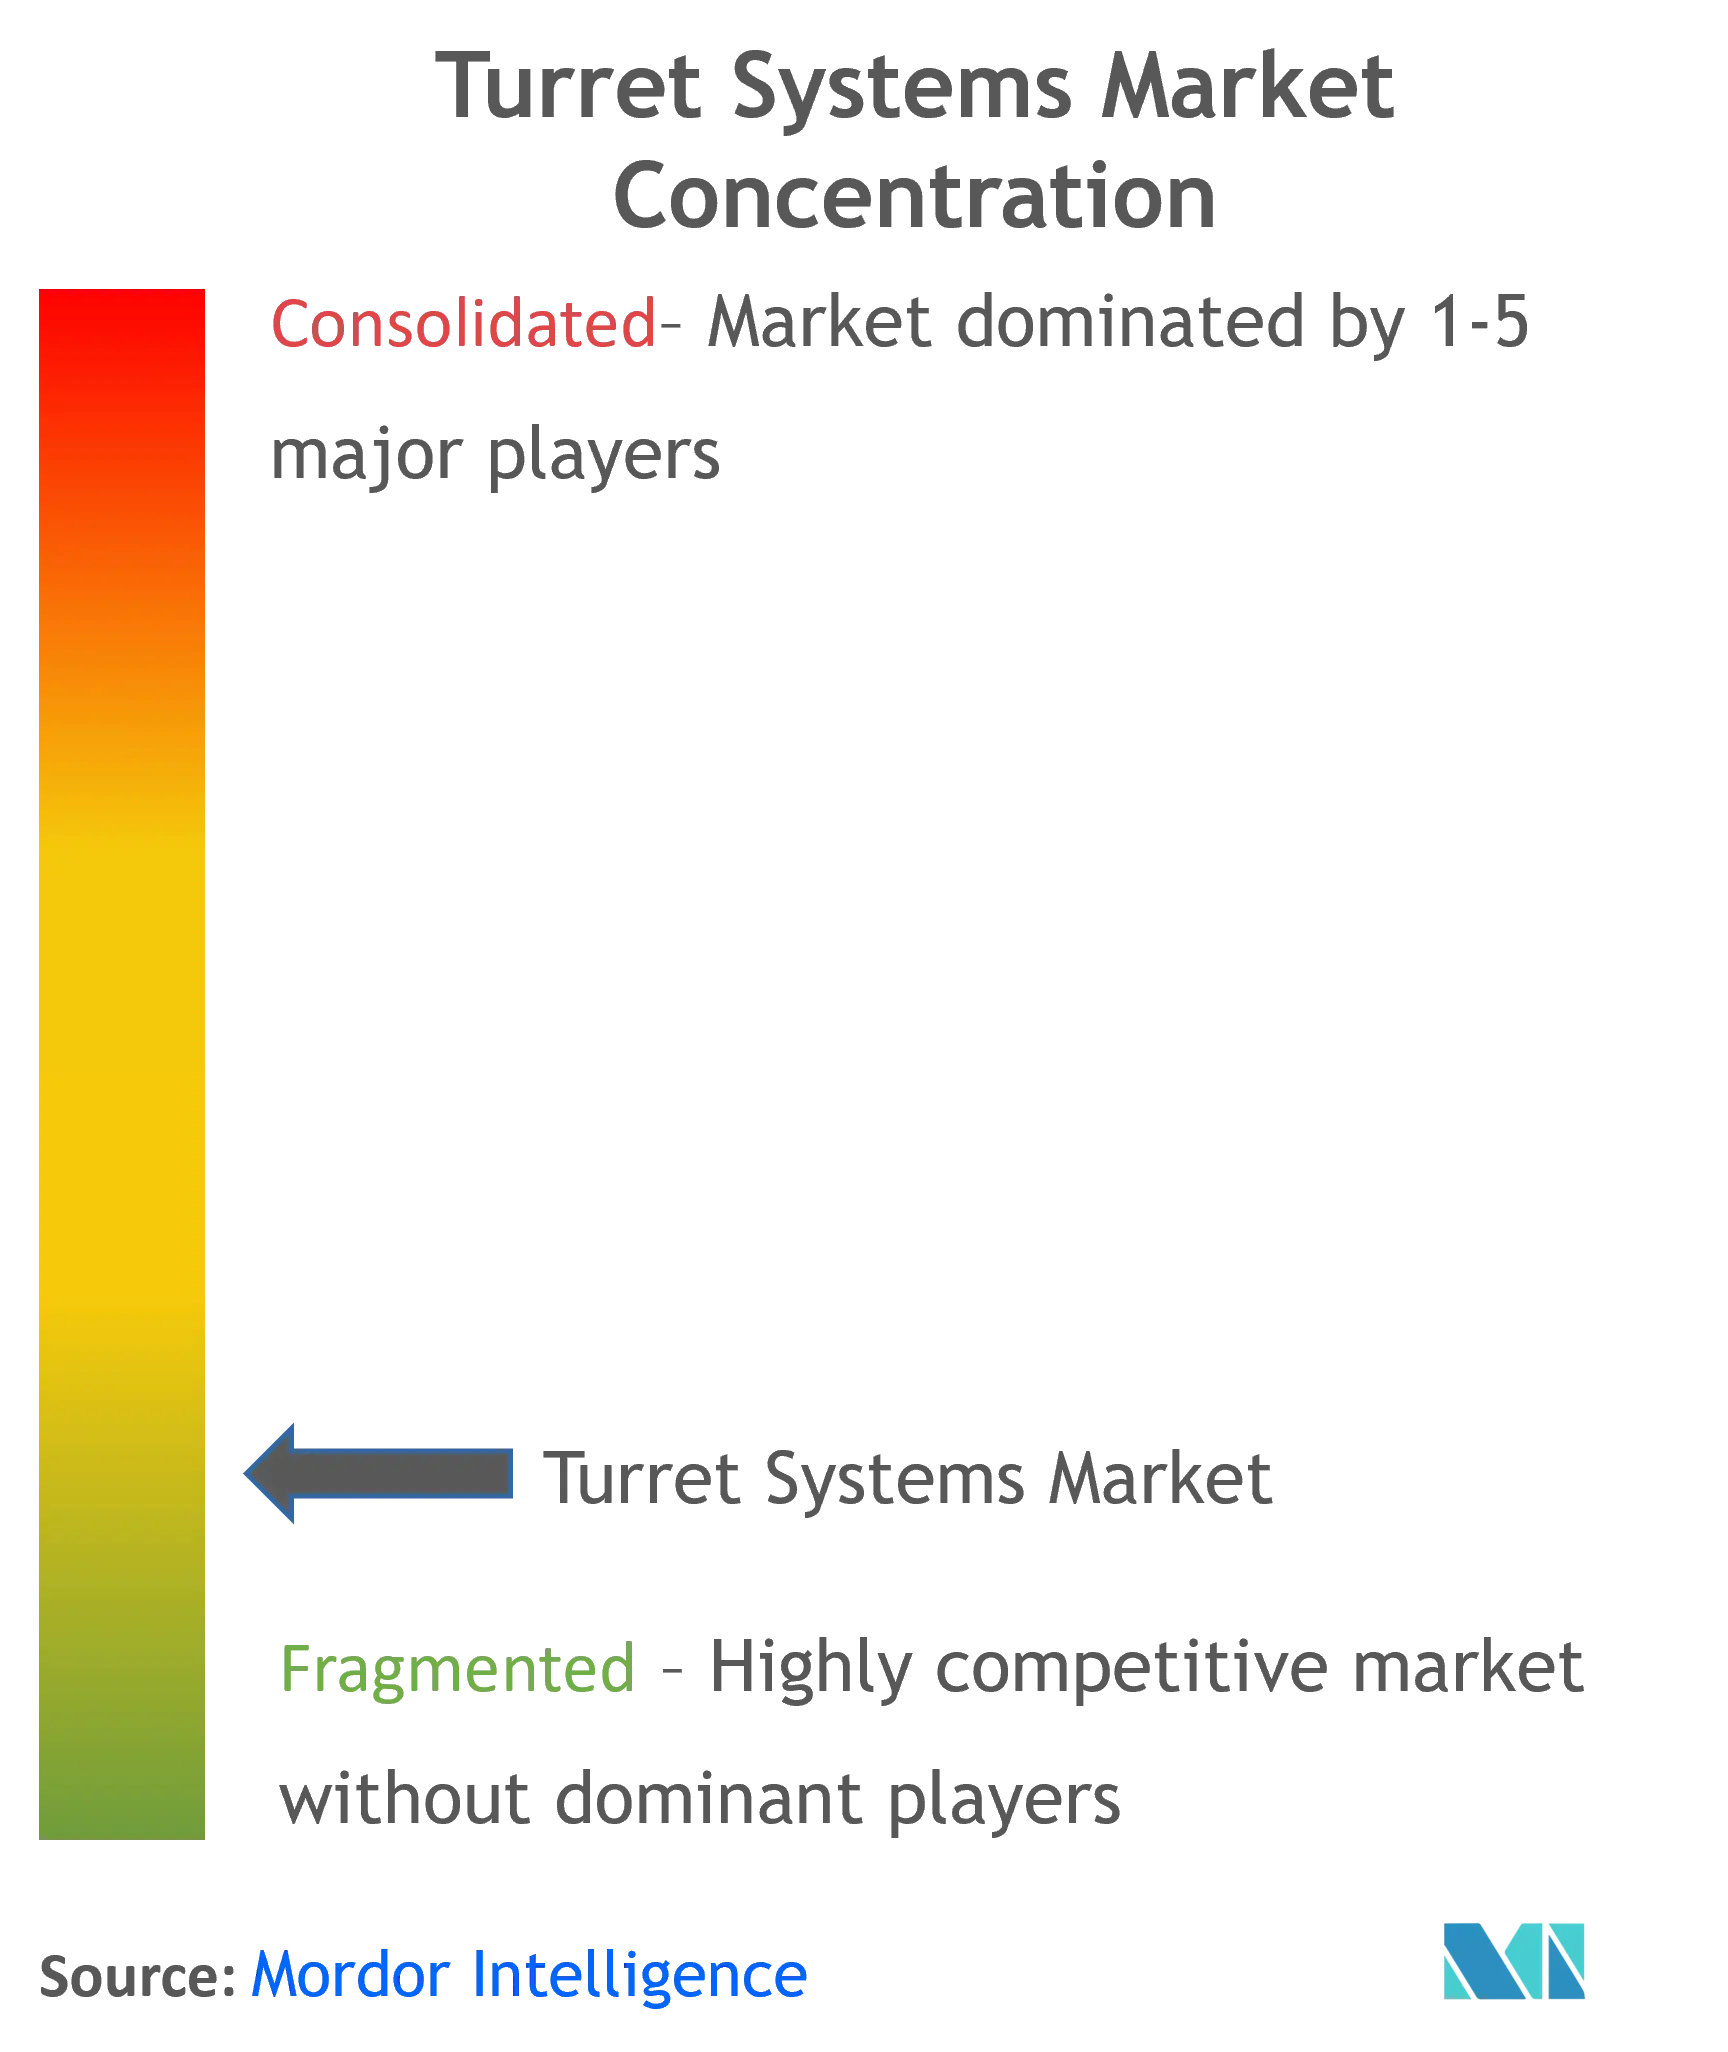 Turret Systems Market Concentration